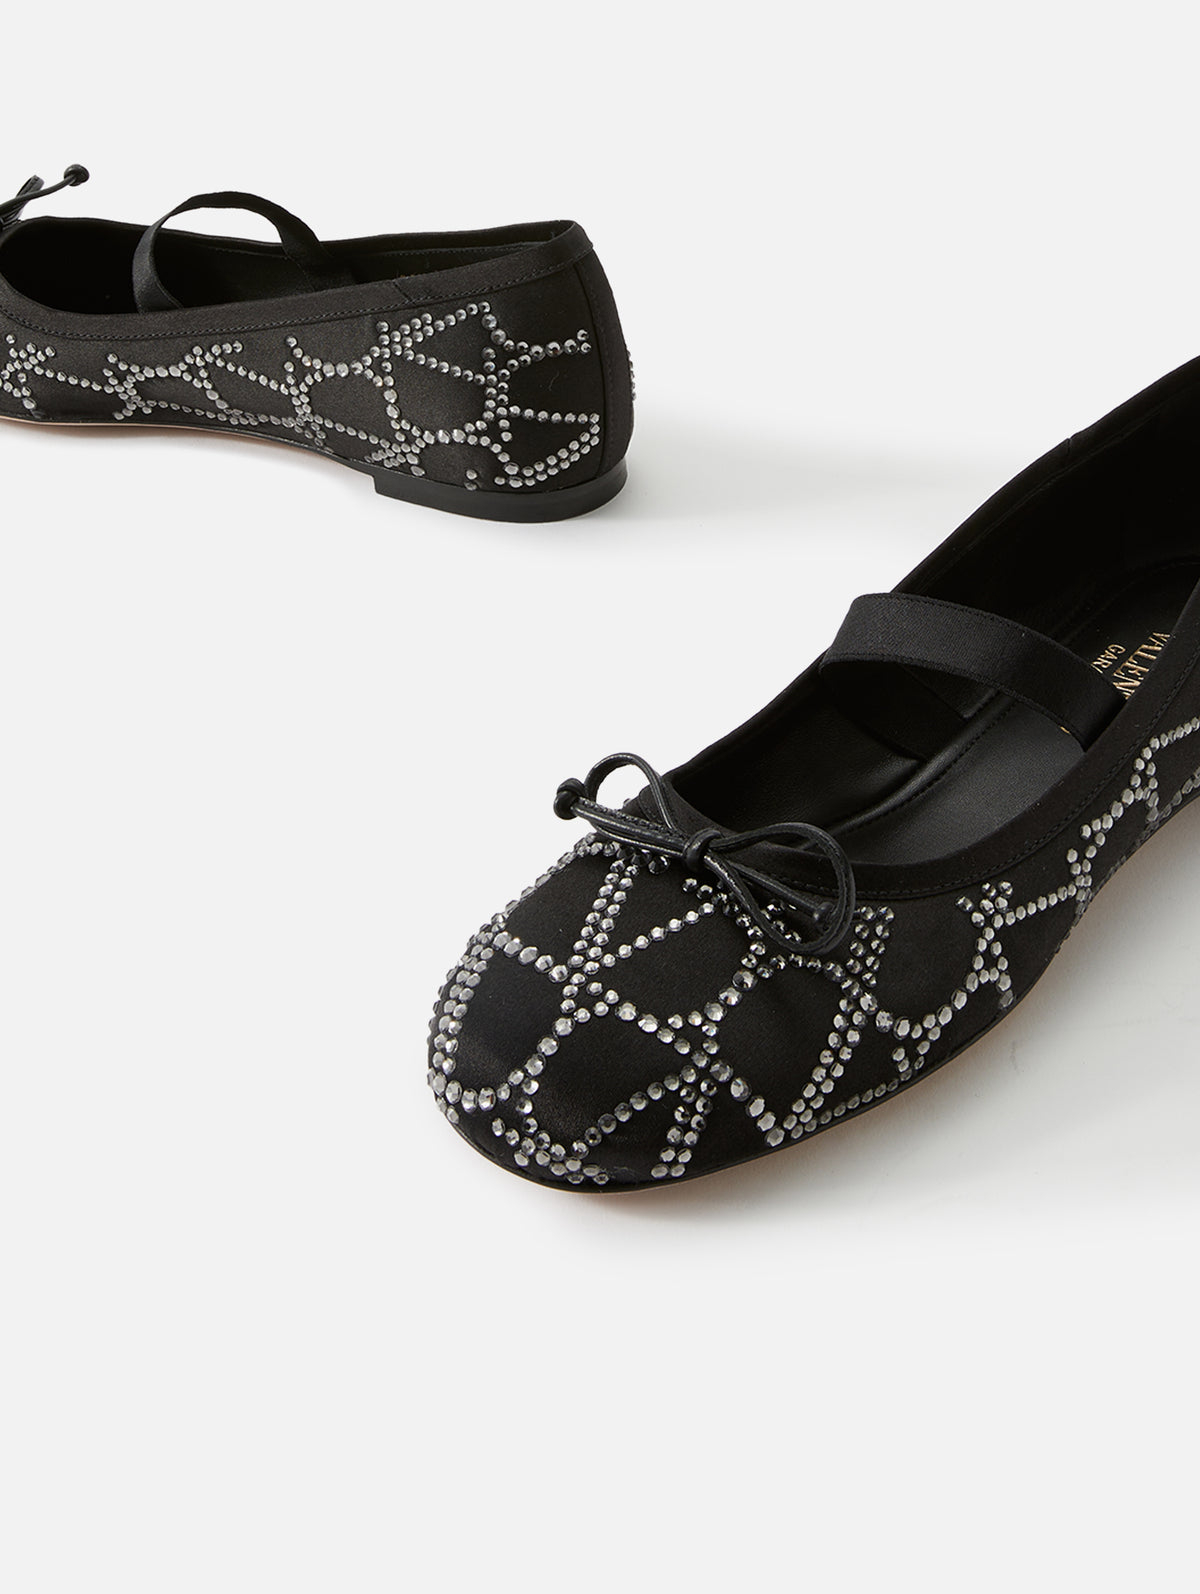 view 2 - Iconic Crystal Ballerina Flat